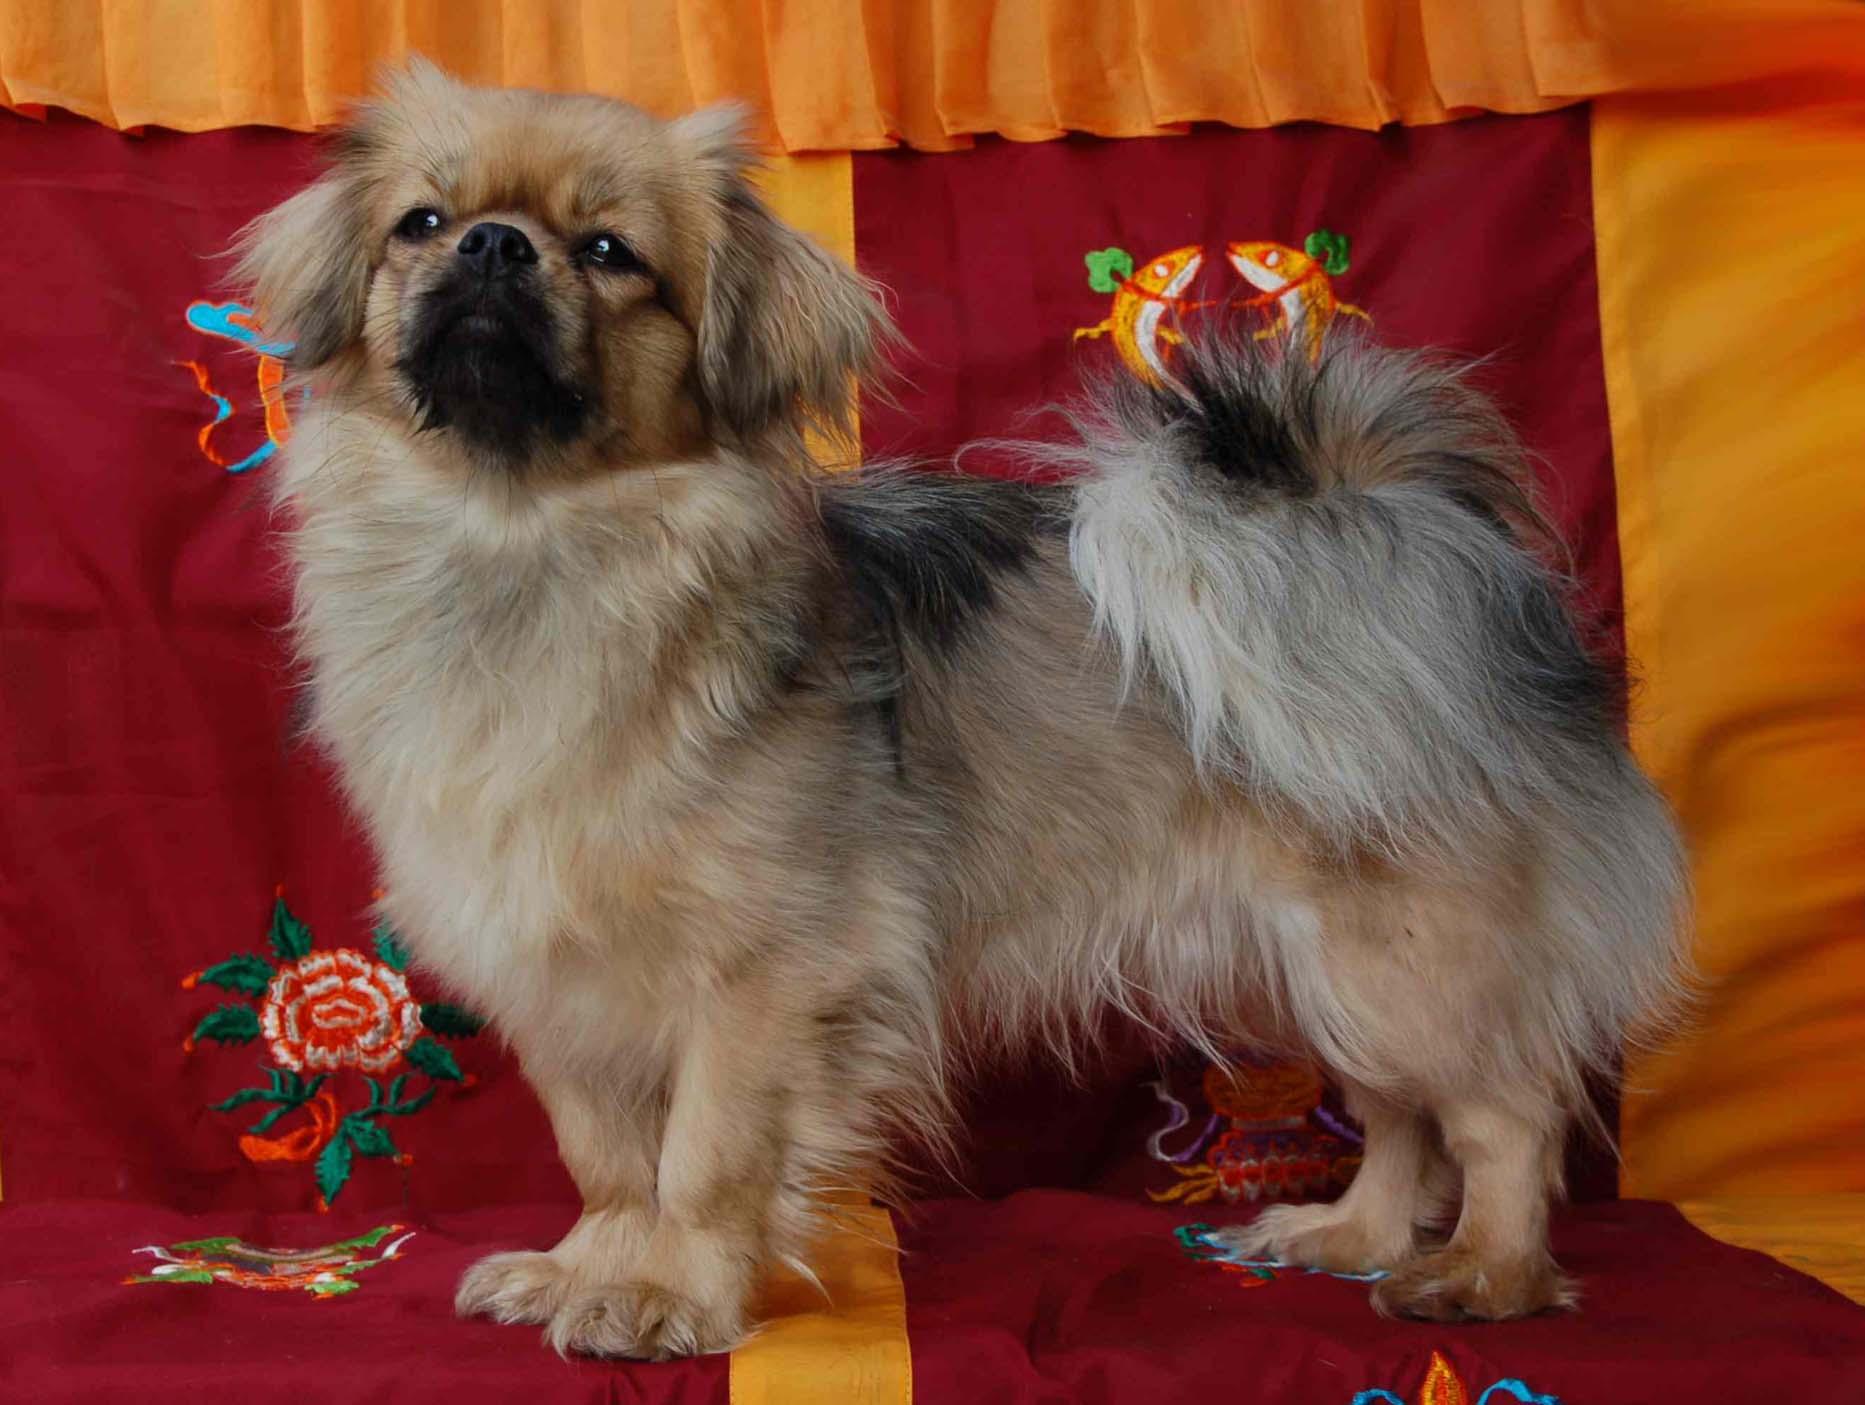 Tibetan Spaniel on the couch wallpaper